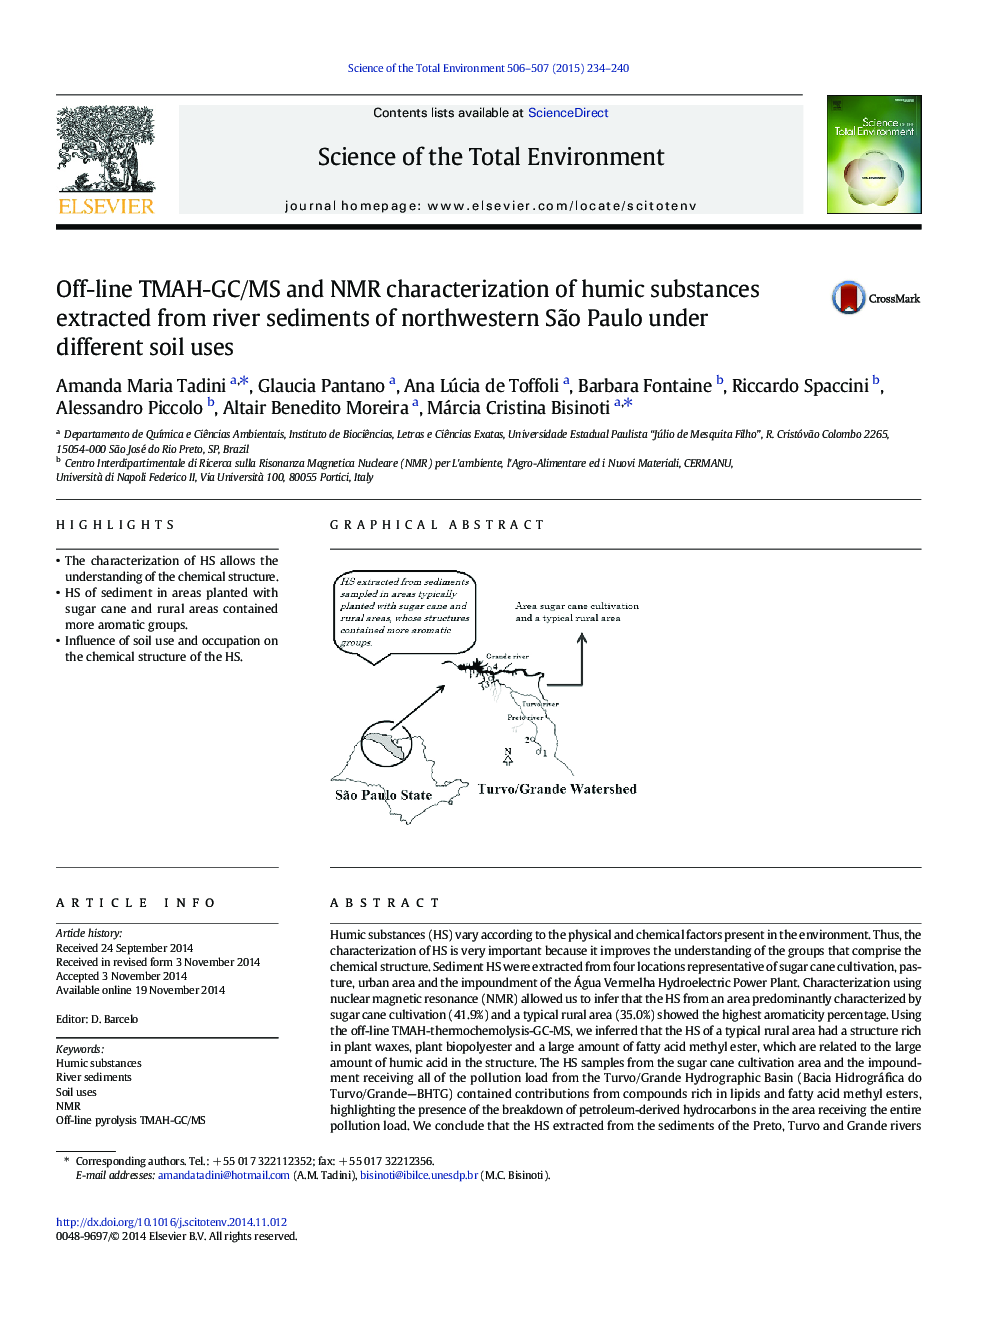 Off-line TMAH-GC/MS and NMR characterization of humic substances extracted from river sediments of northwestern SÃ£o Paulo under different soil uses